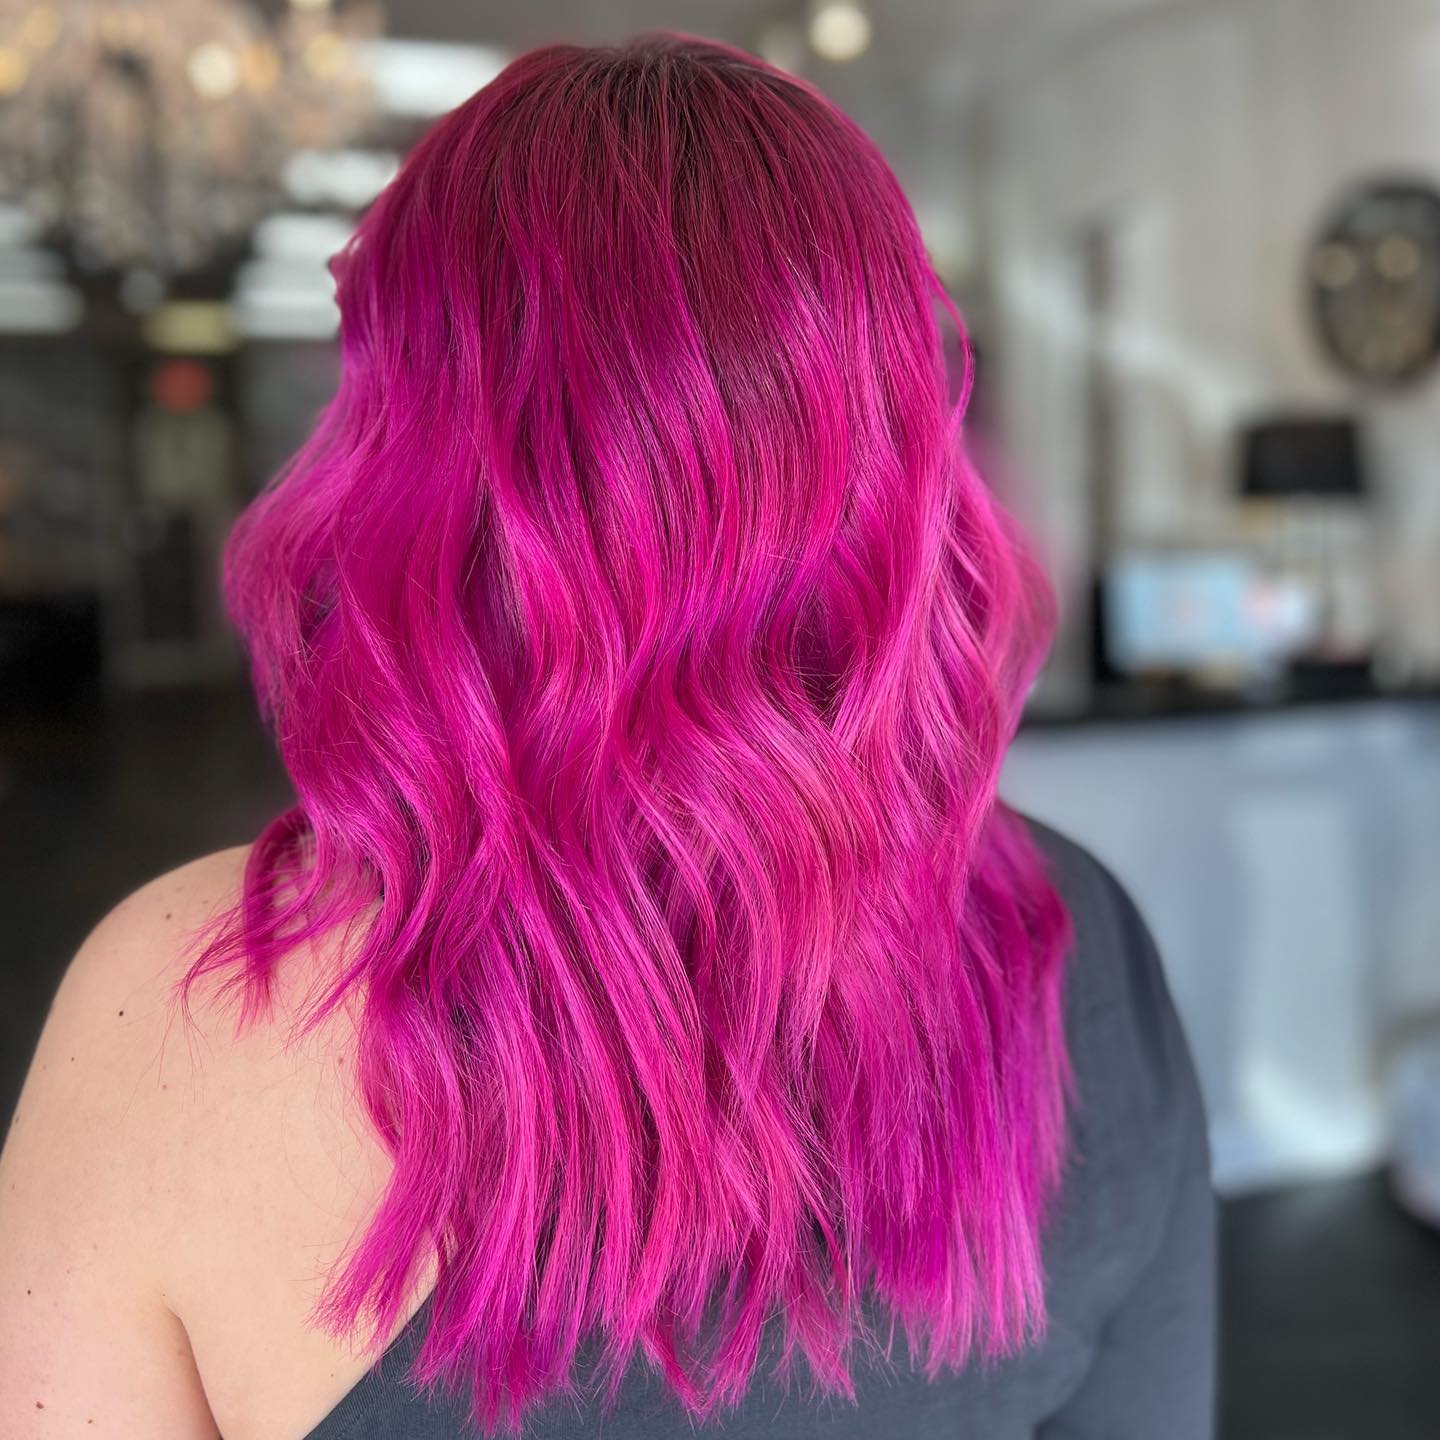 pink ombre hair color 89 Ombre pink hair blonde | Pastel pink ombre hair | Pink balayage Hair Pink Ombre Hair Color for Women